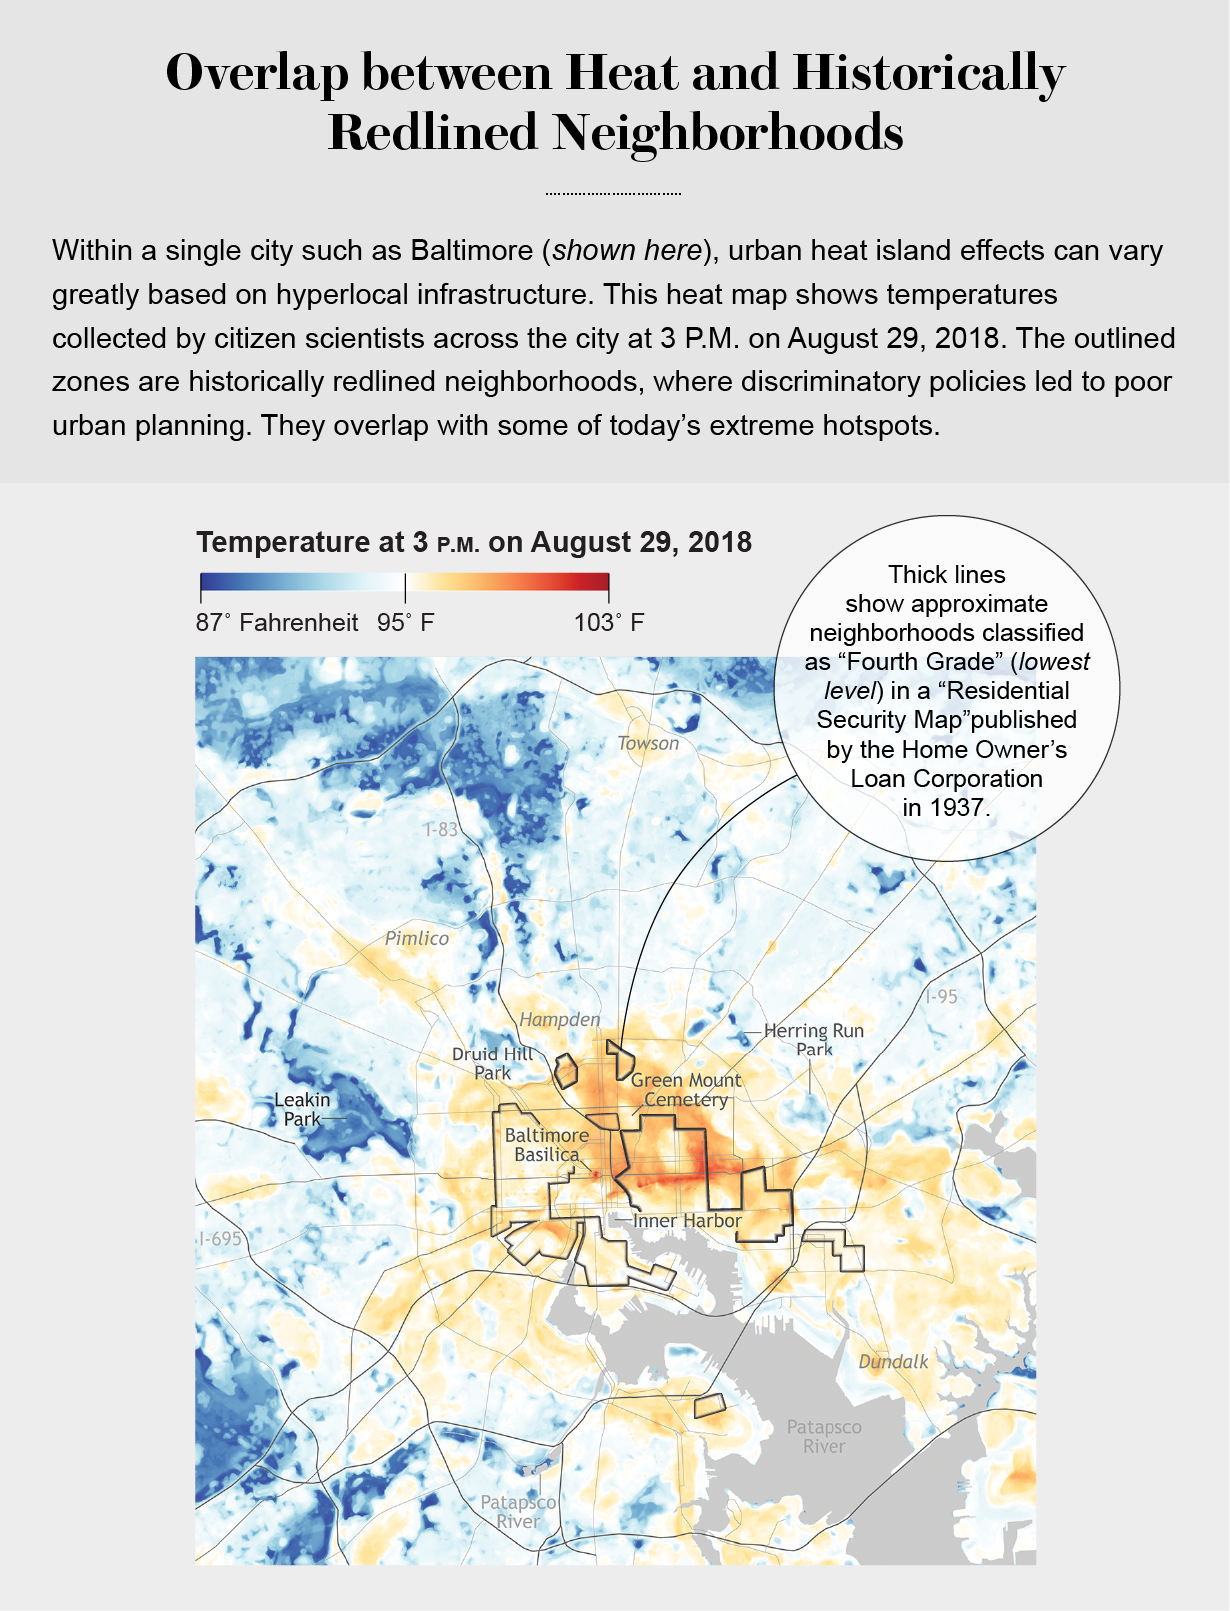 Map of Baltimore overlays temperature data at 3 P.M. on August 29, 2018, and outlines showing historically redlined neighborhoods, with higher temperatures occurring largely within redlined zones.